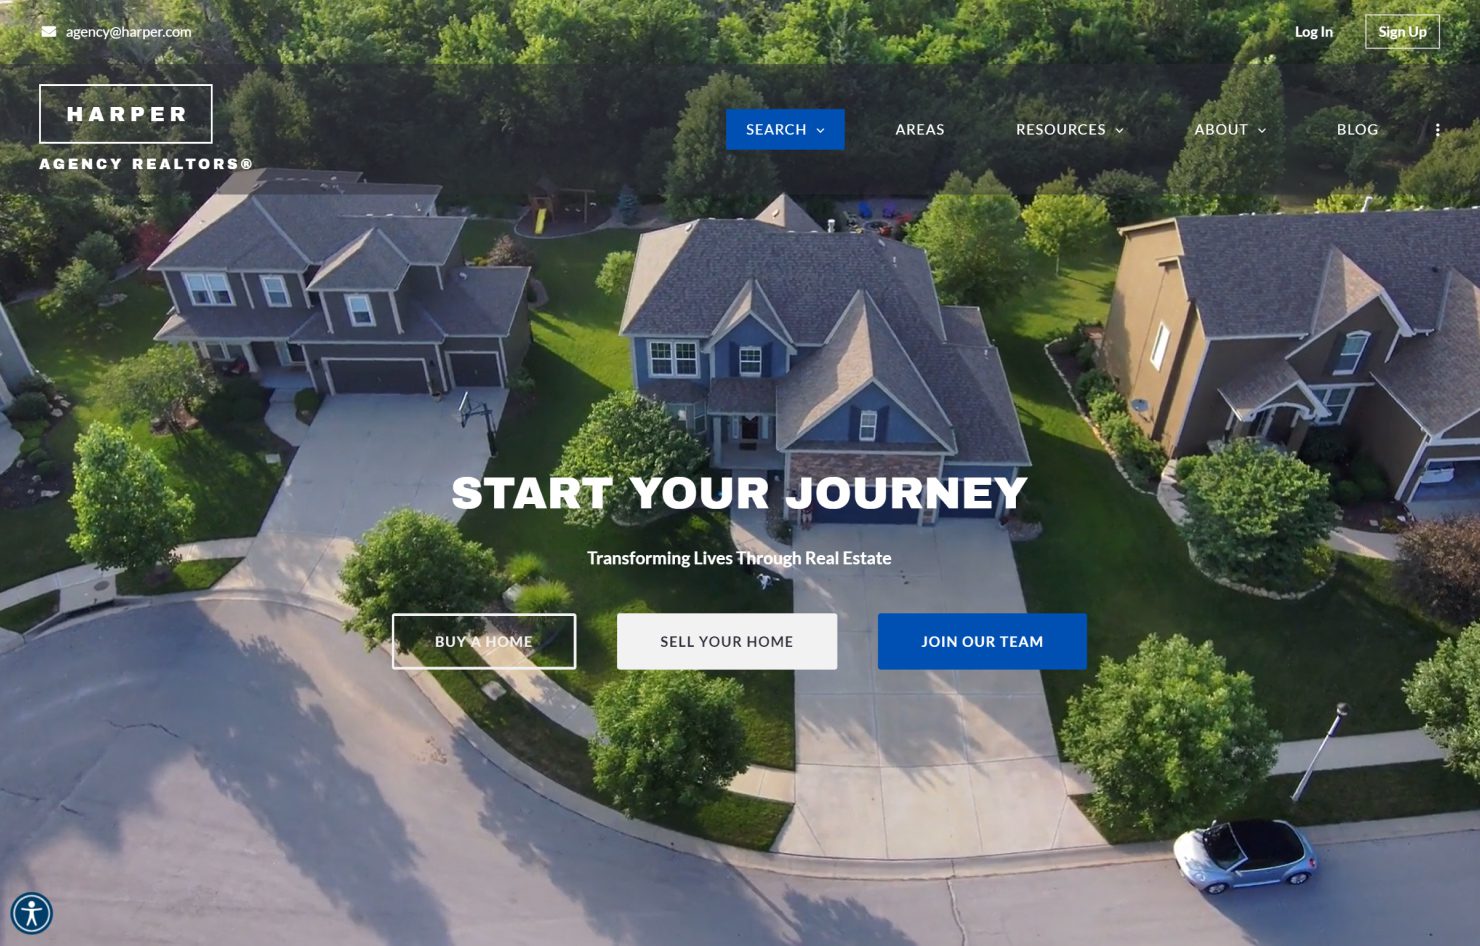 Placester is built for lead generation for real estate agents. It has ample features and many customization options, but it is also one of the easiest tools. Users can select from several packages to set up and manage their website the way they desire. 